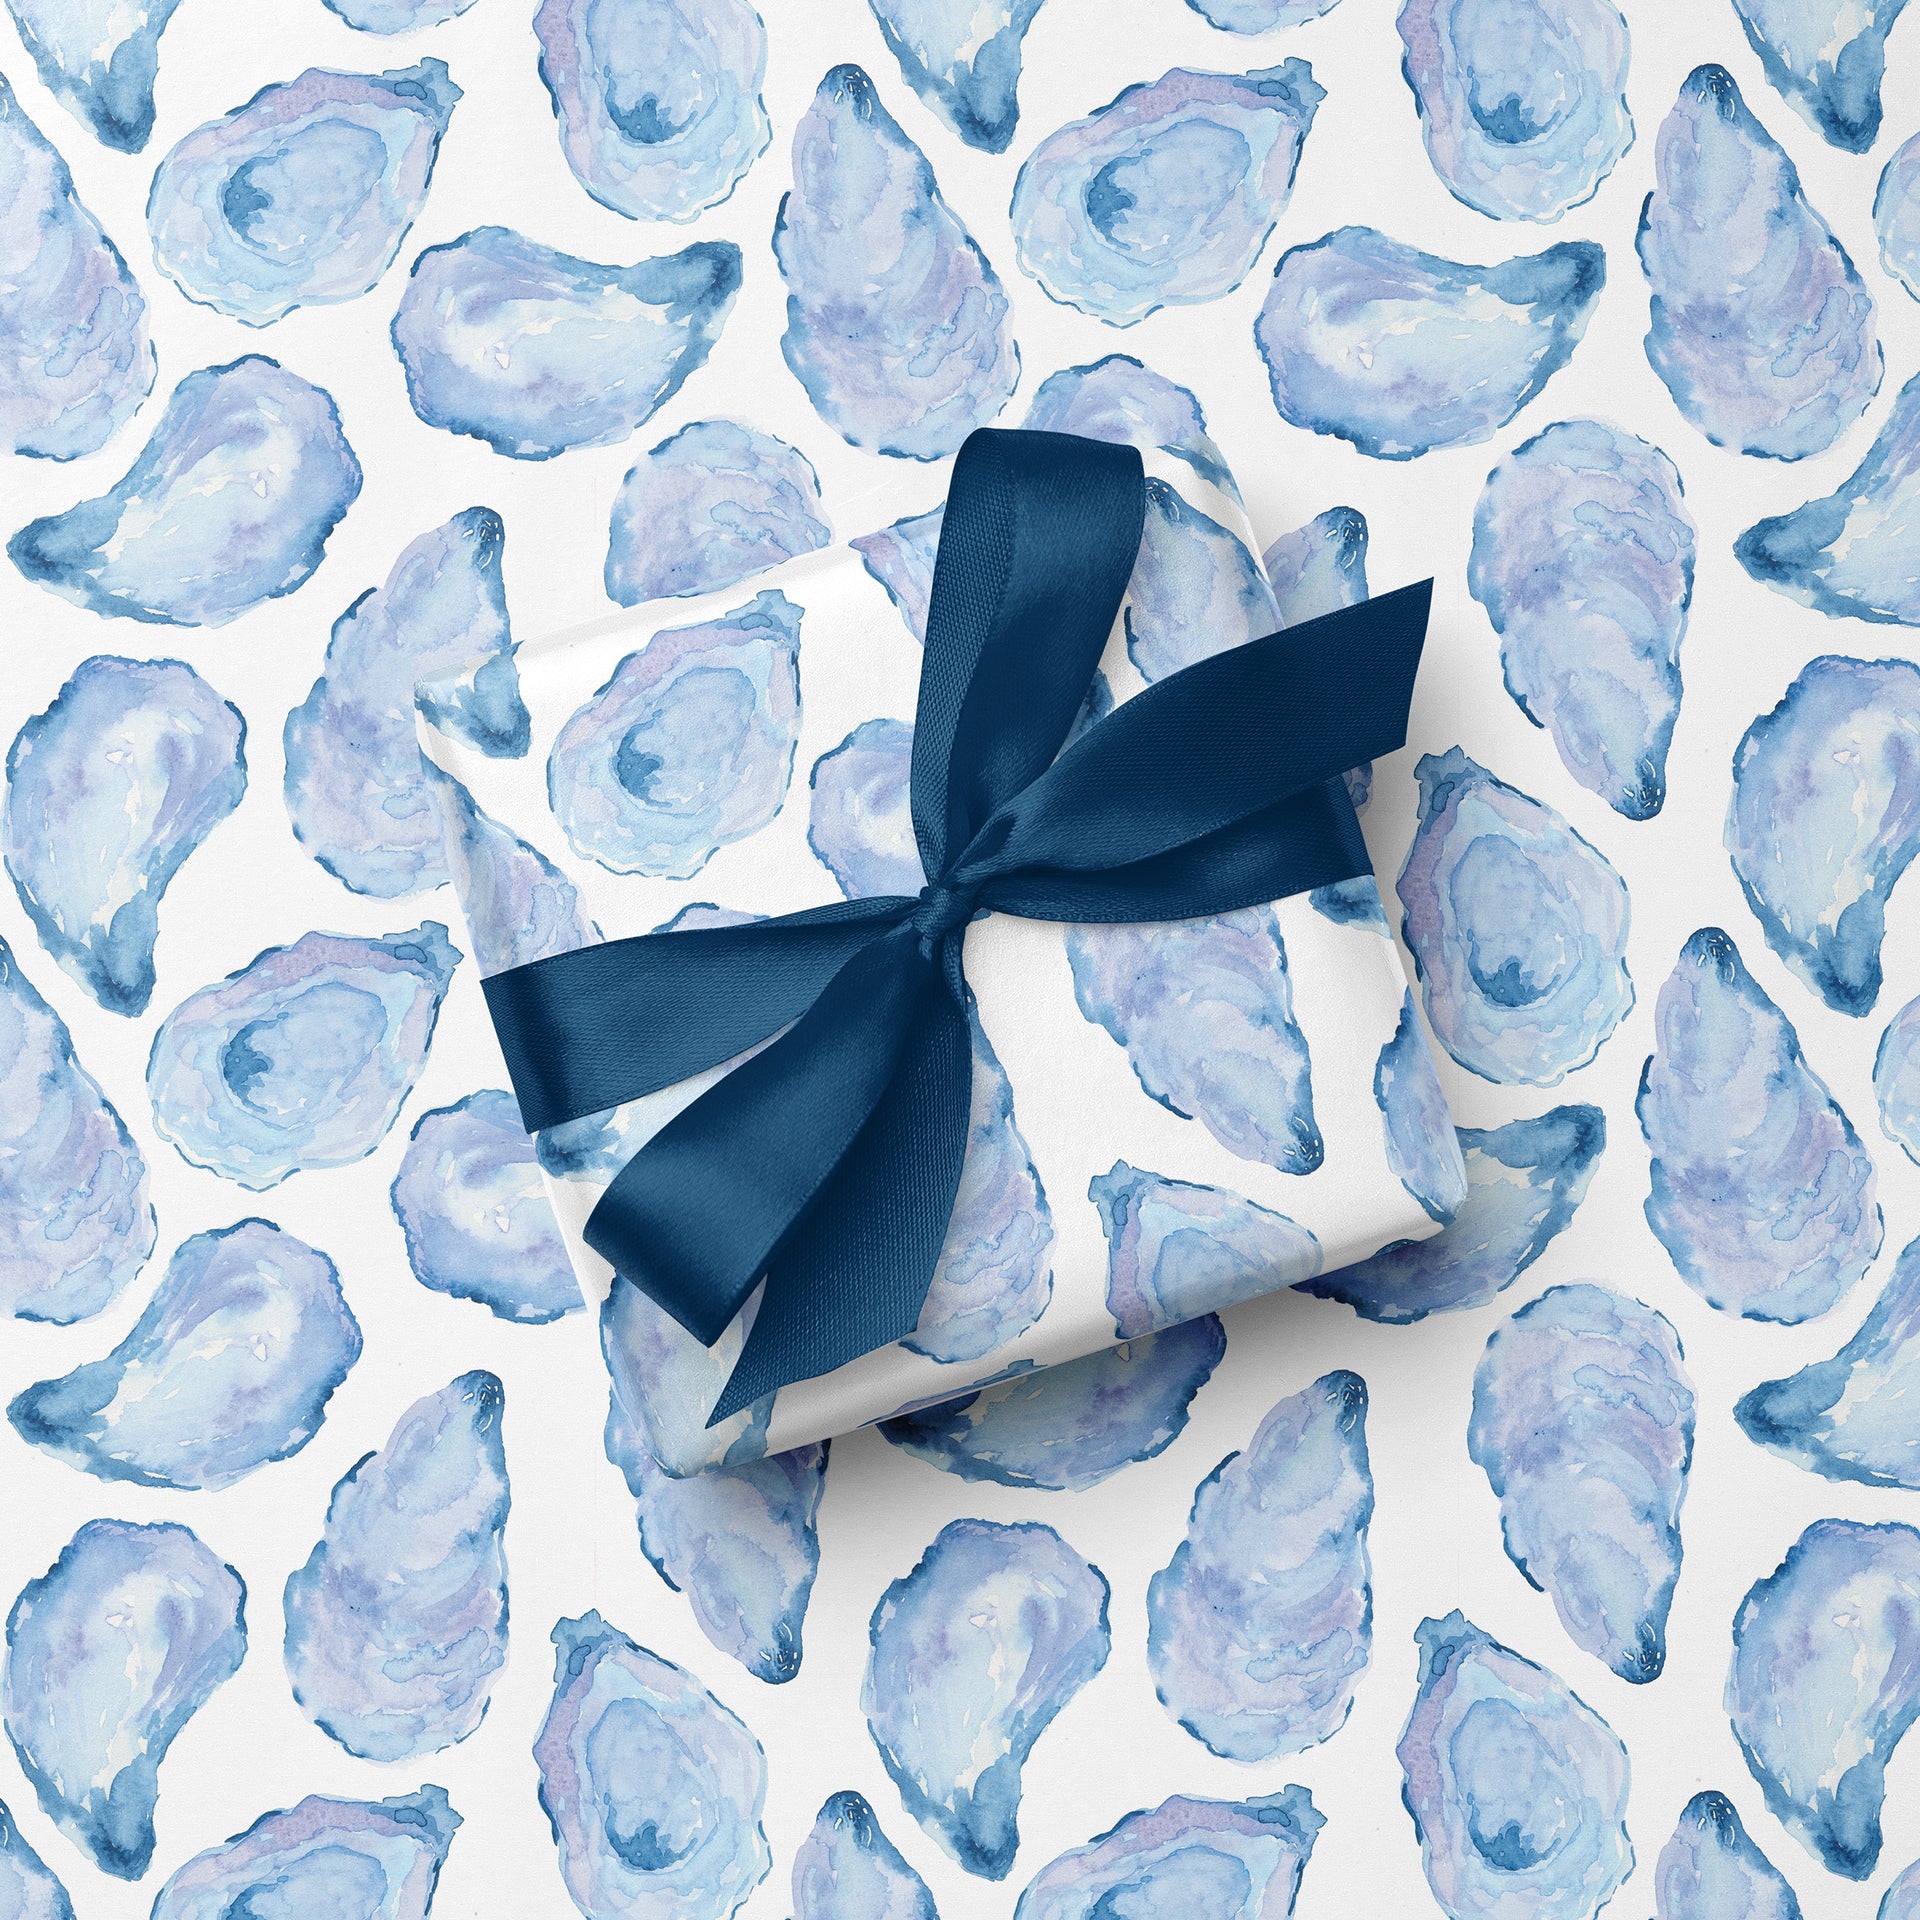 Watercolor Mussel Shell Gift Wrap by Gert & Co